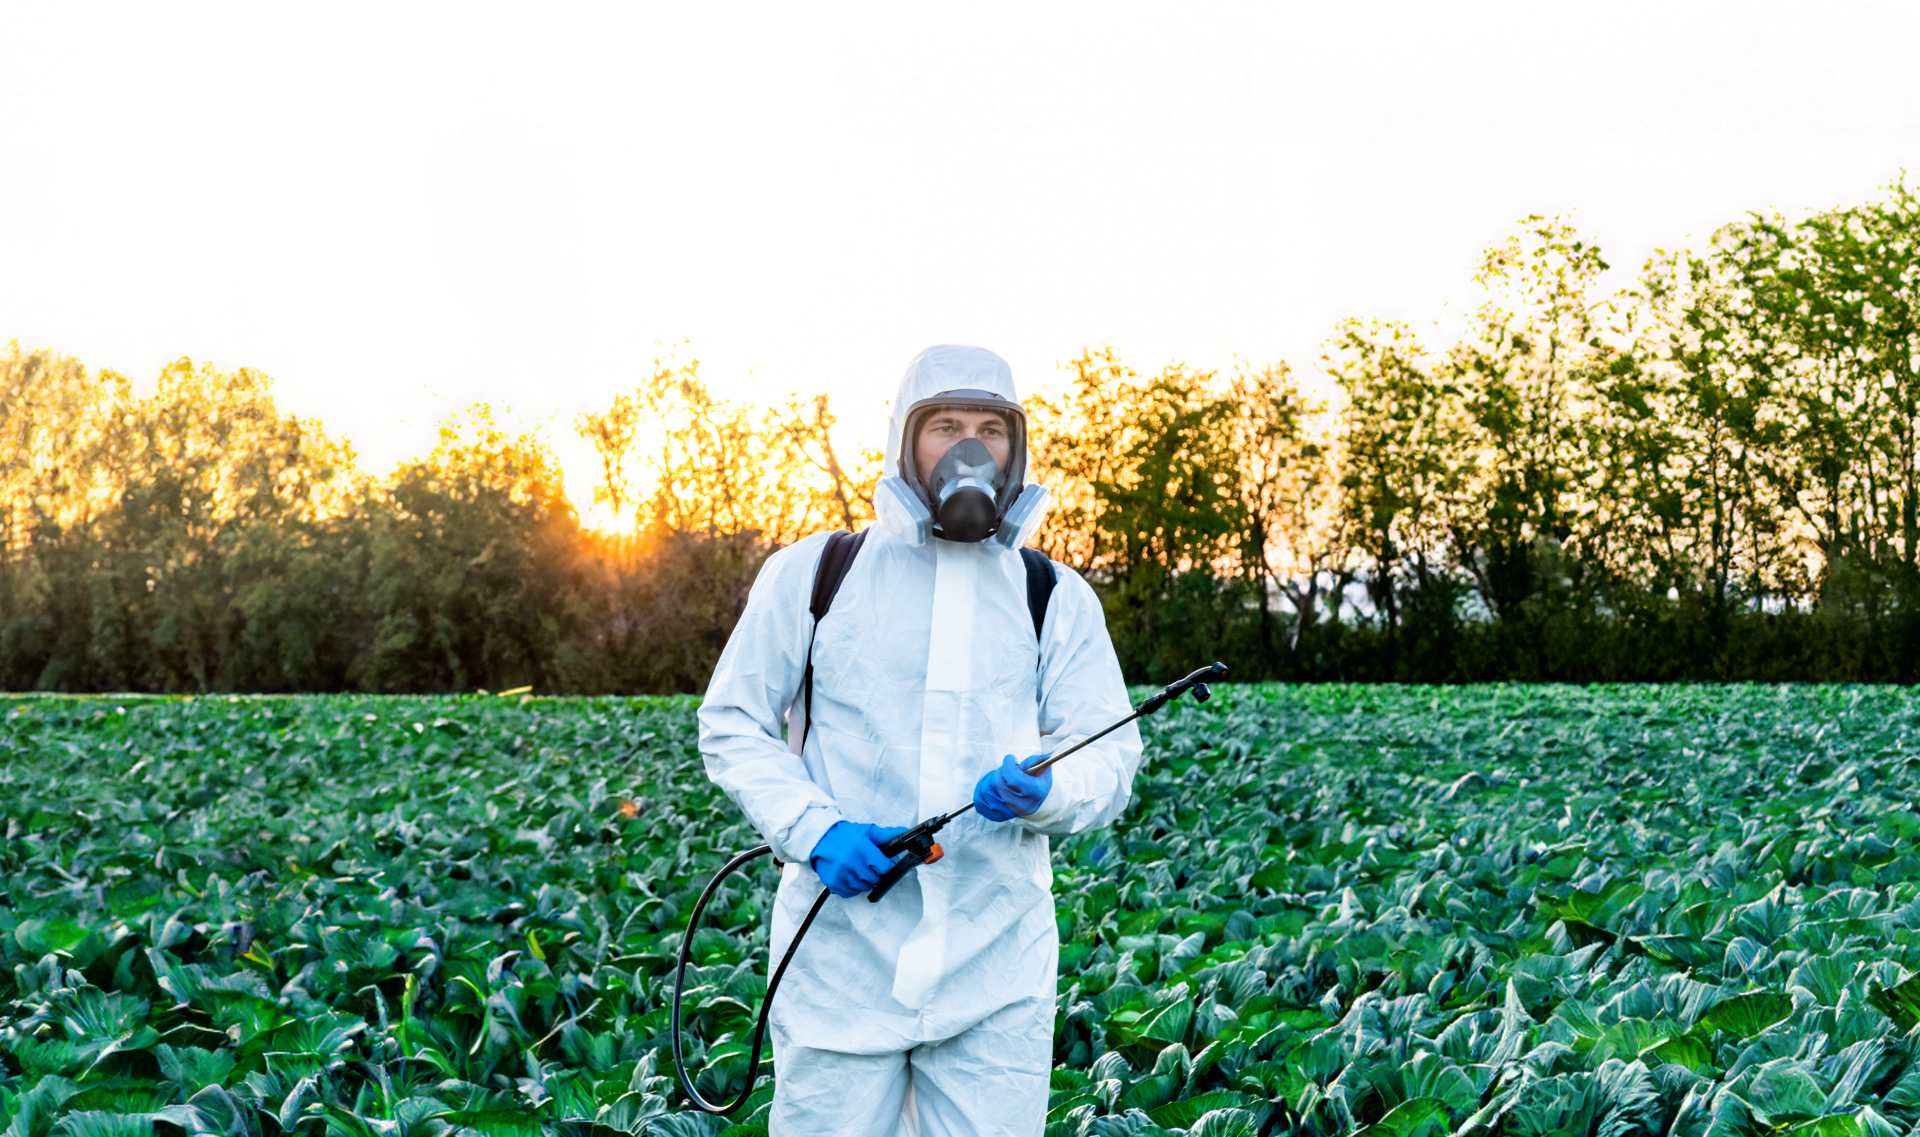 Farmer Spraying Pesticide Field Mask Harvest Protective Chemical